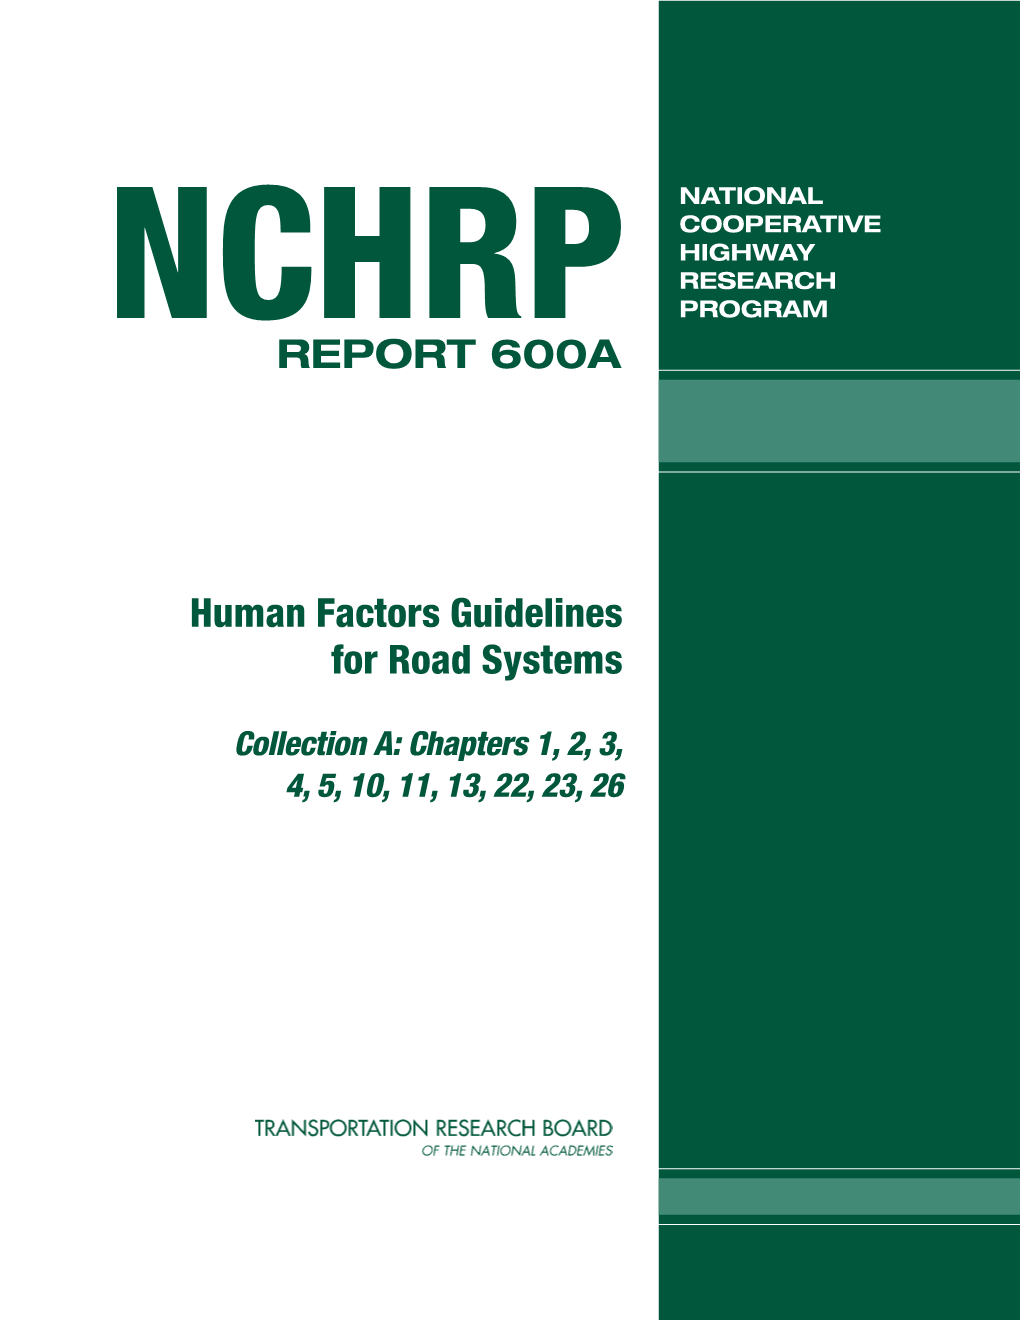 NCHRP Report 600A – Human Factors Guidelines for Road